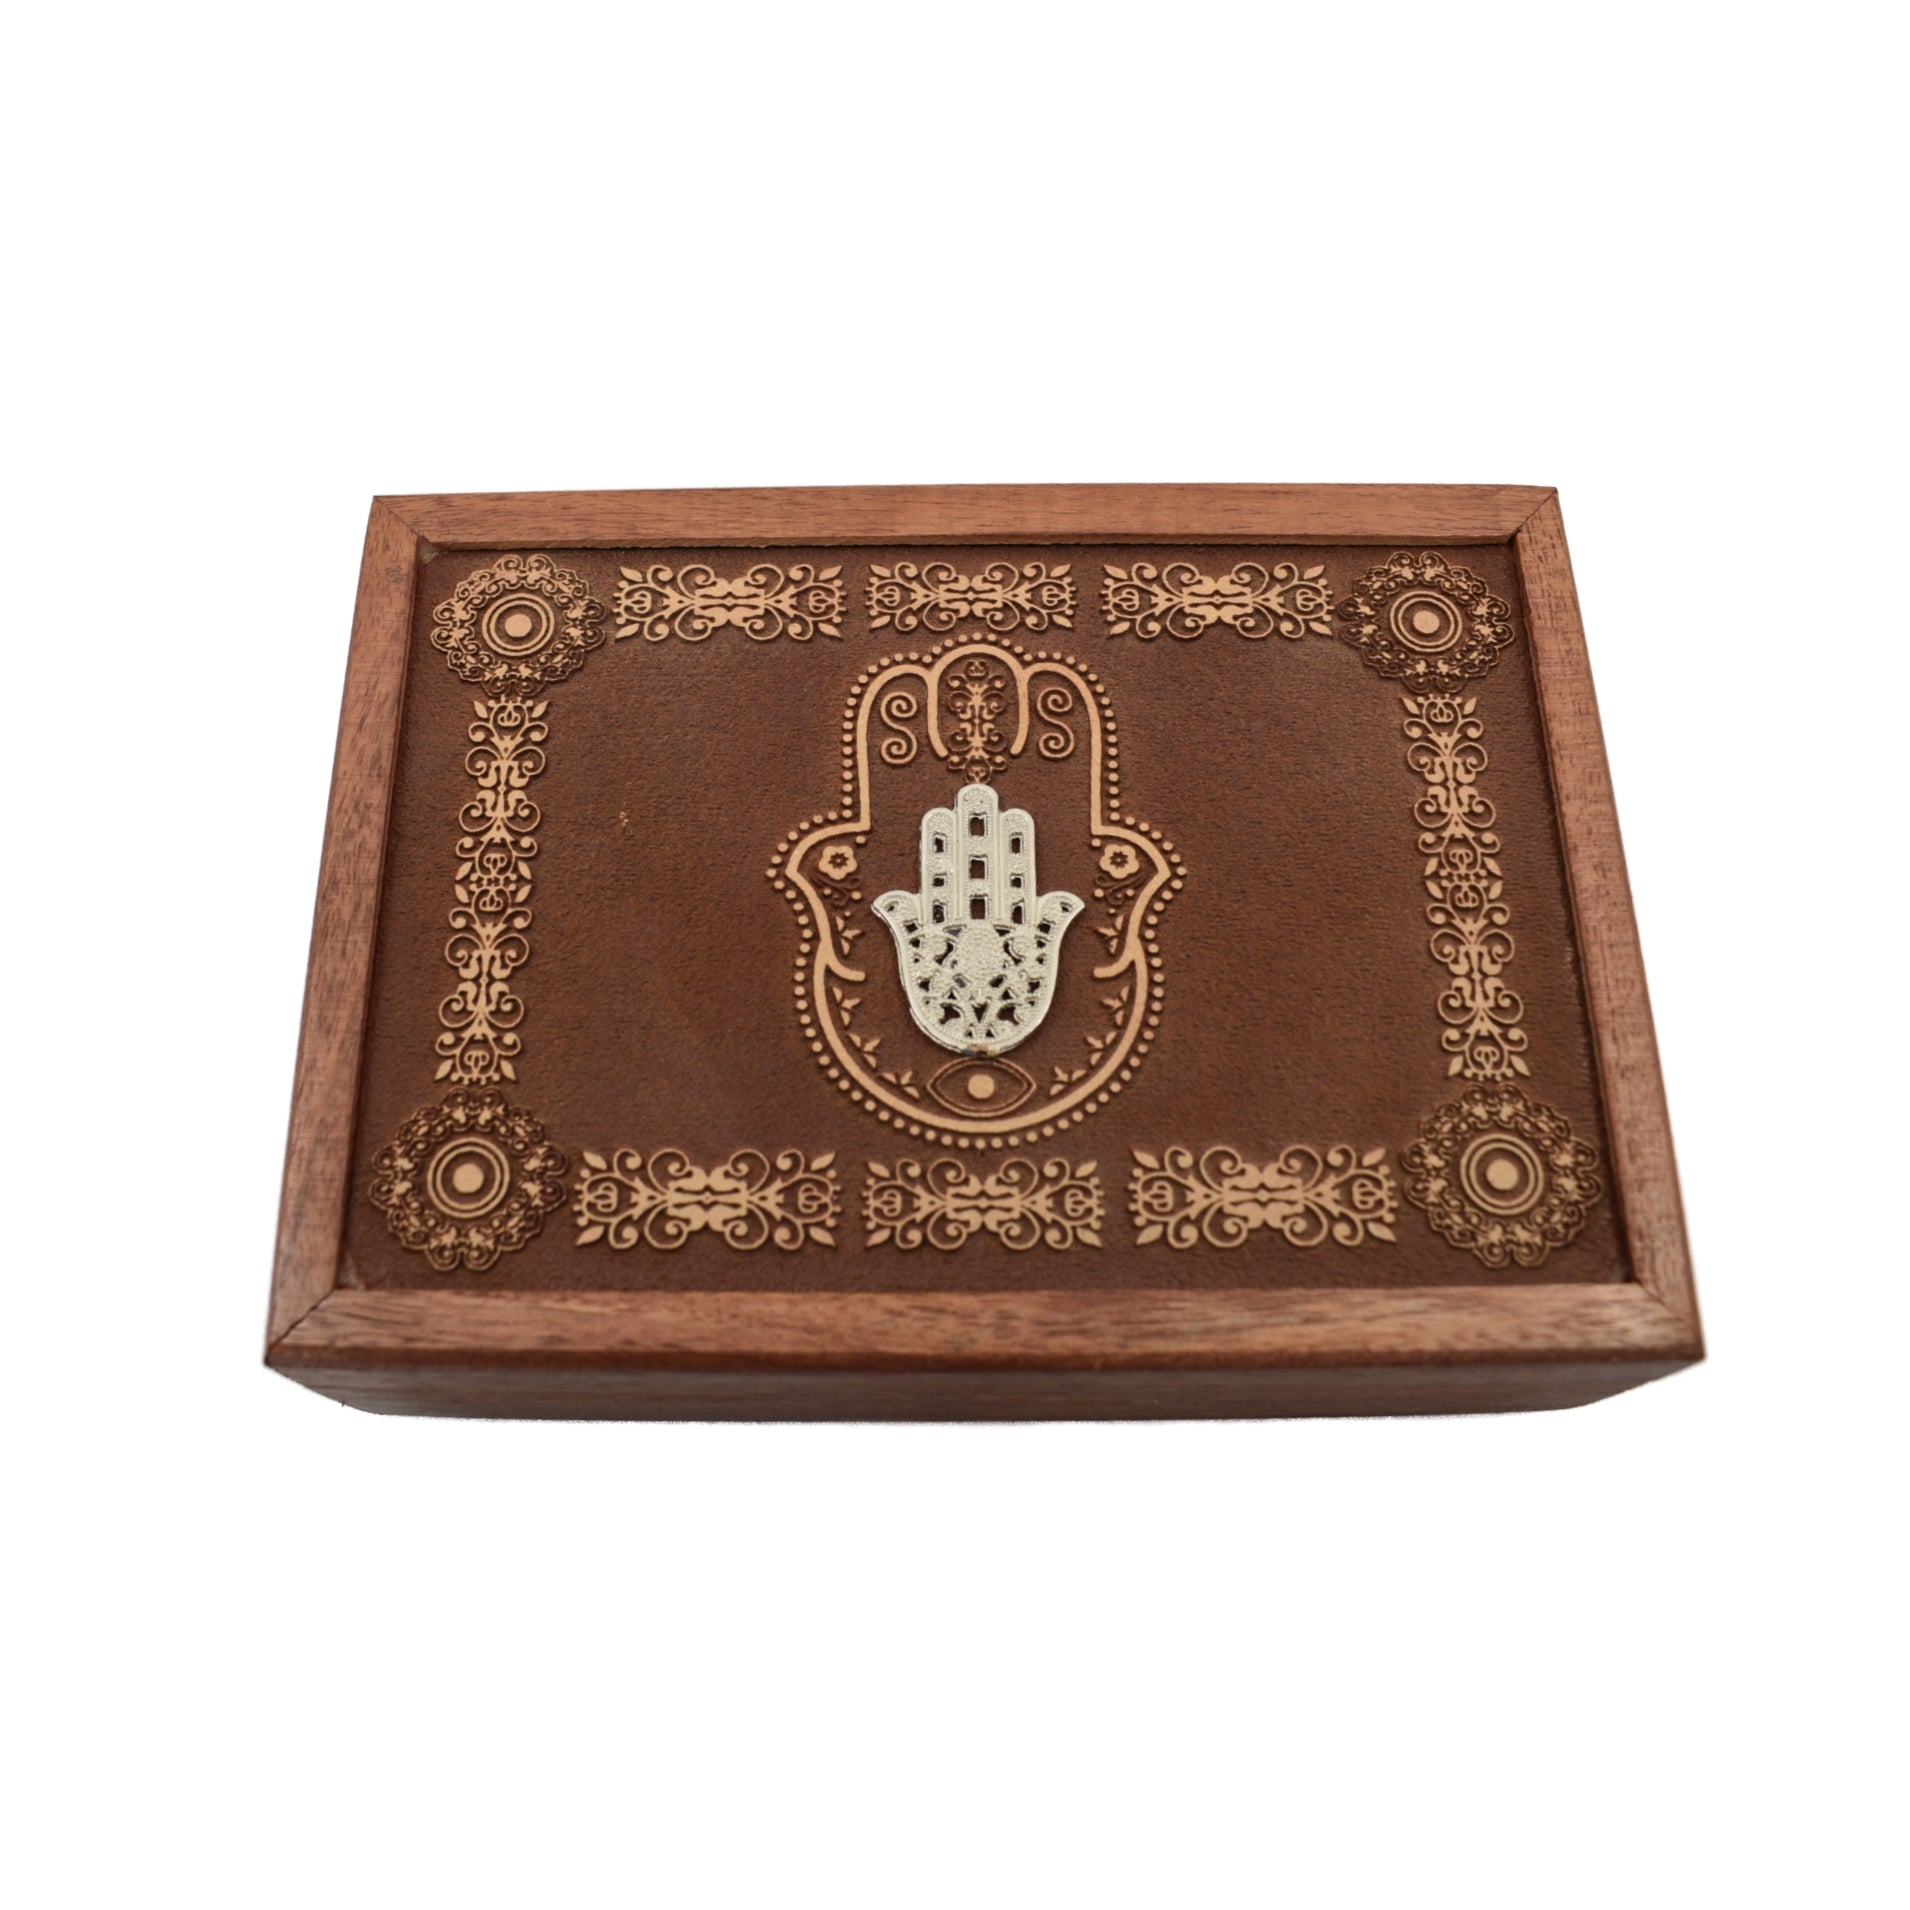 beautiful engraved box with lace like carving, etched Hamsa hand and an inlaid hand as well 